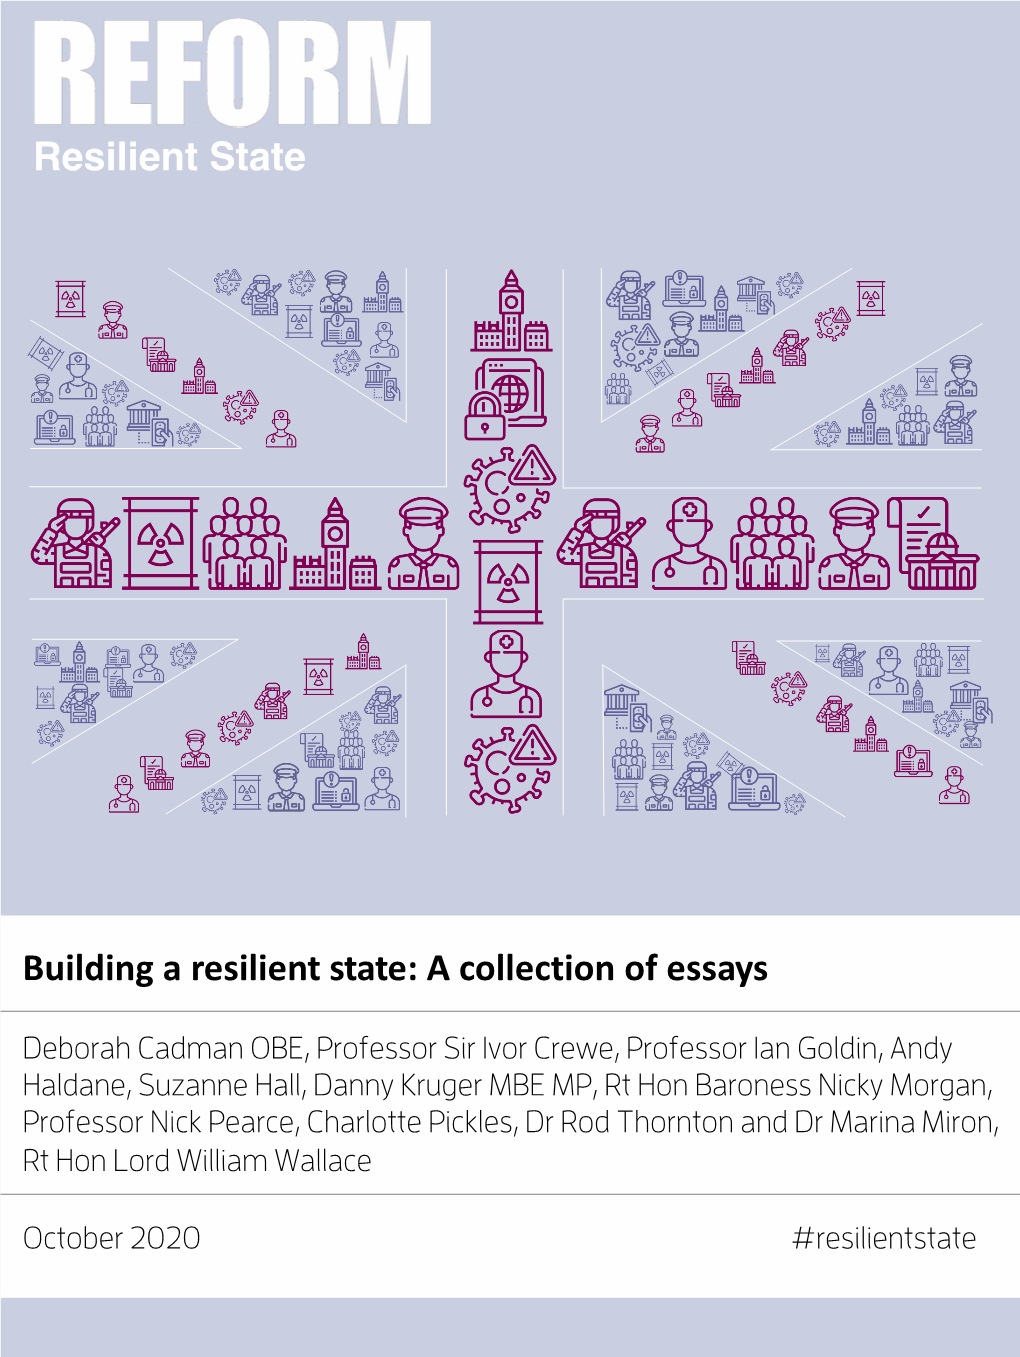 Building a Resilient State: a Collection of Essays